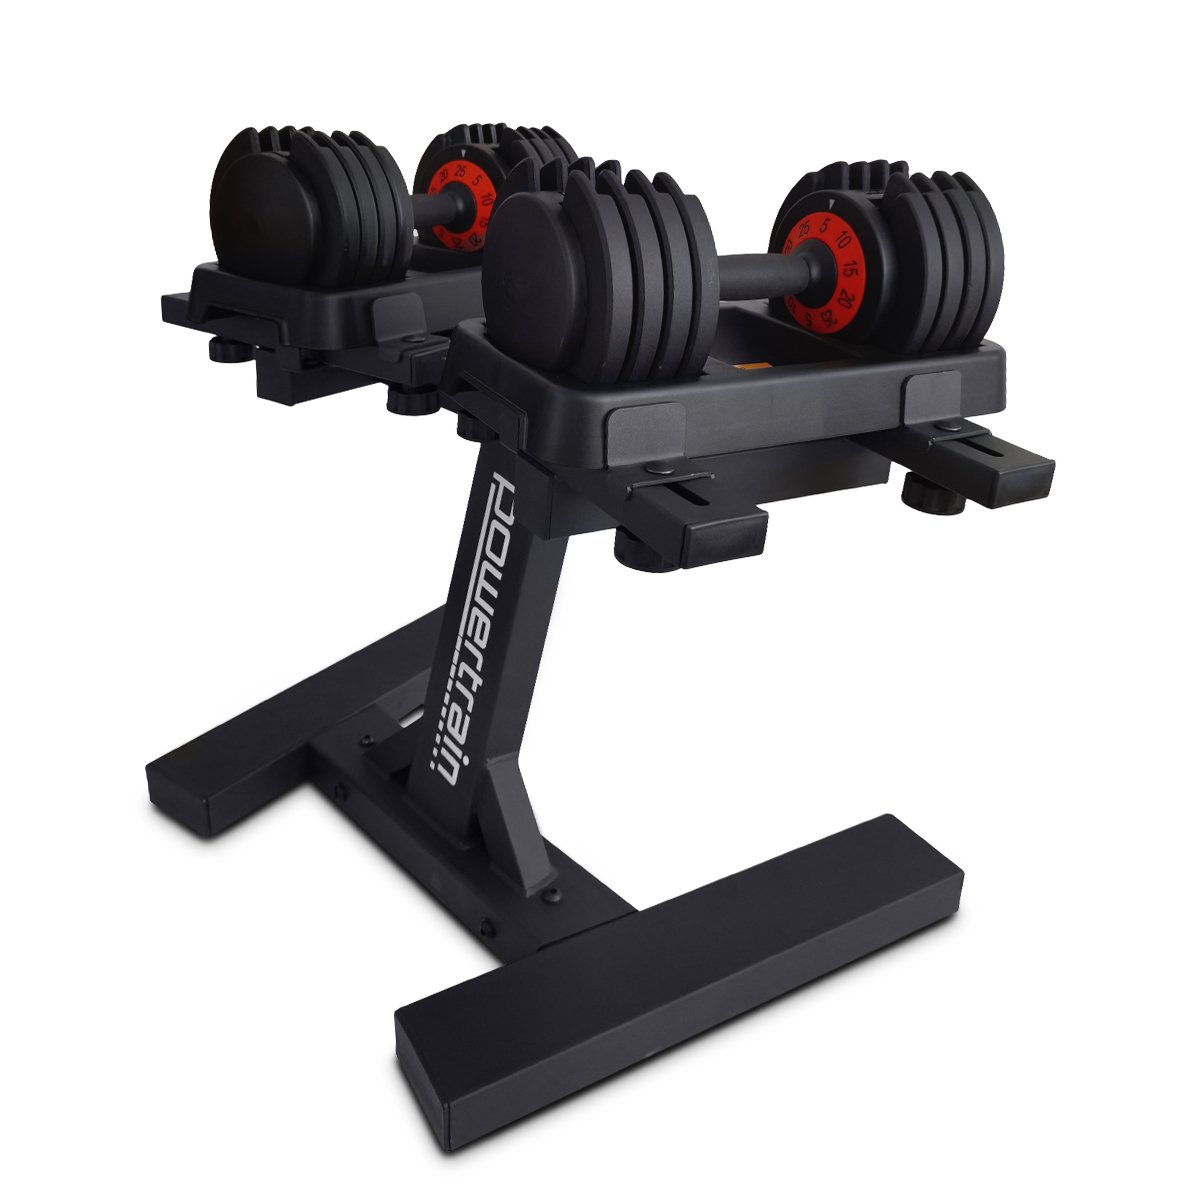 Powertrain GEN2 Pro Adjustable Dumbbell Set - 2 x 25kg (50kg) Home Gym Weights with Stand